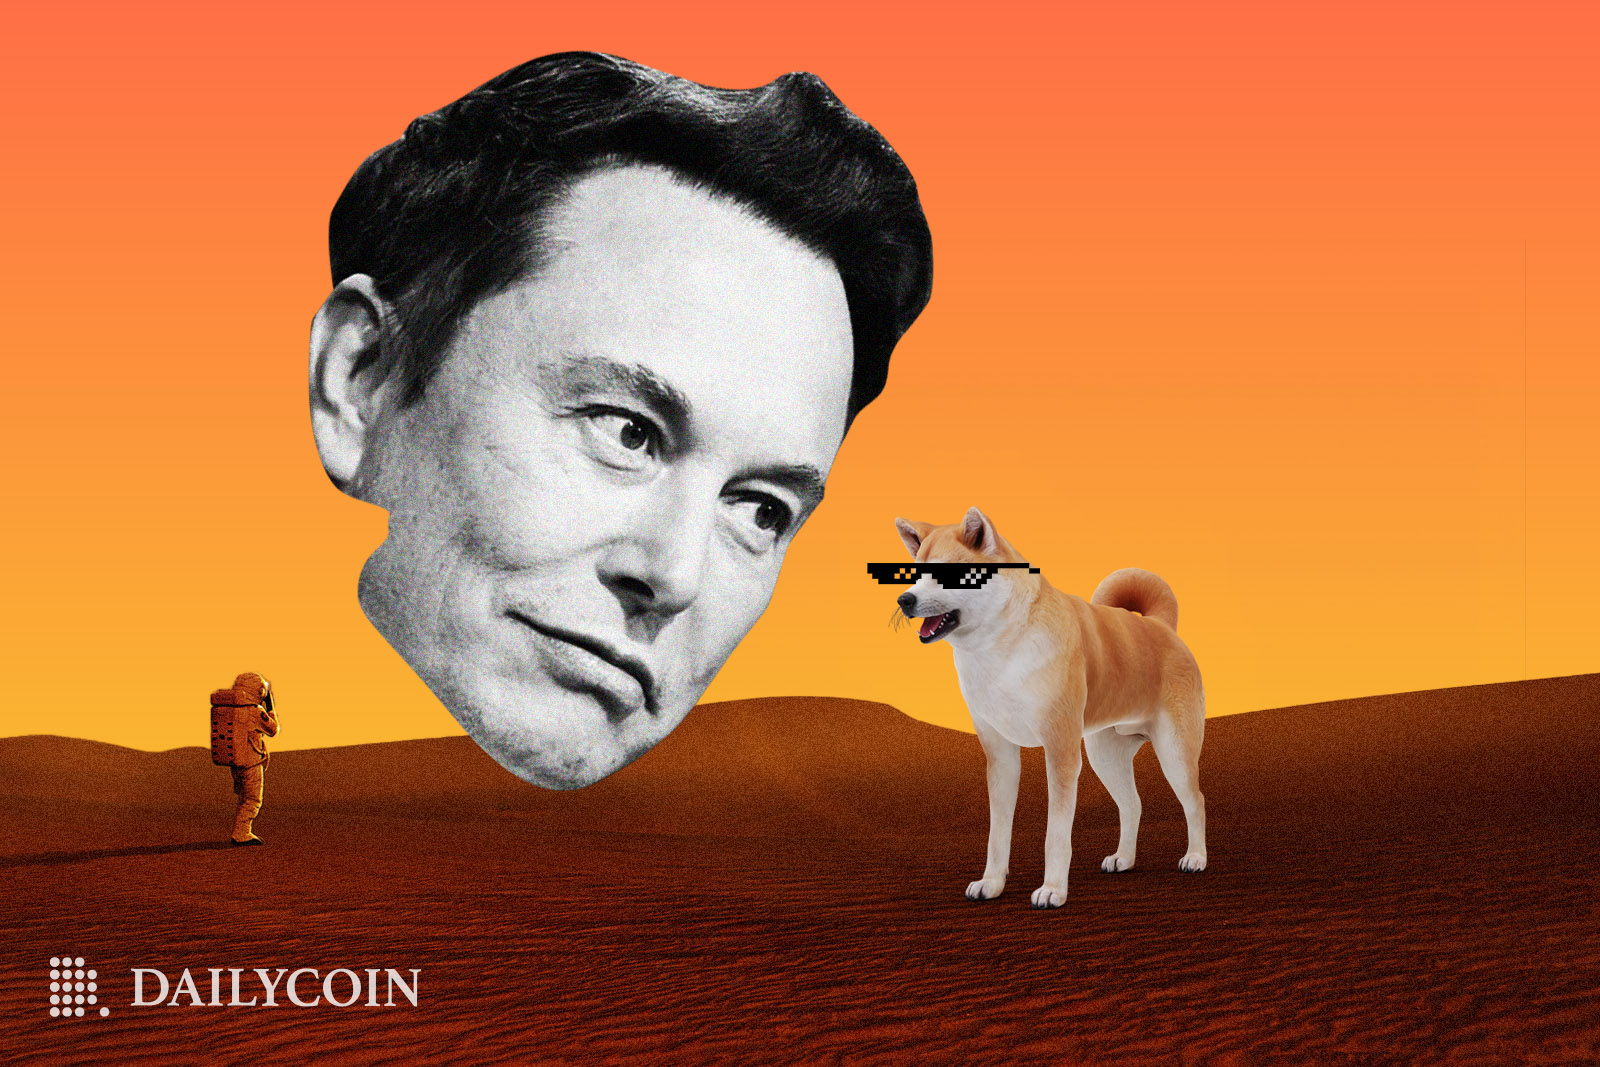 The face of Elon Musk staring at a Shiba Inu with sunglasses in desert.